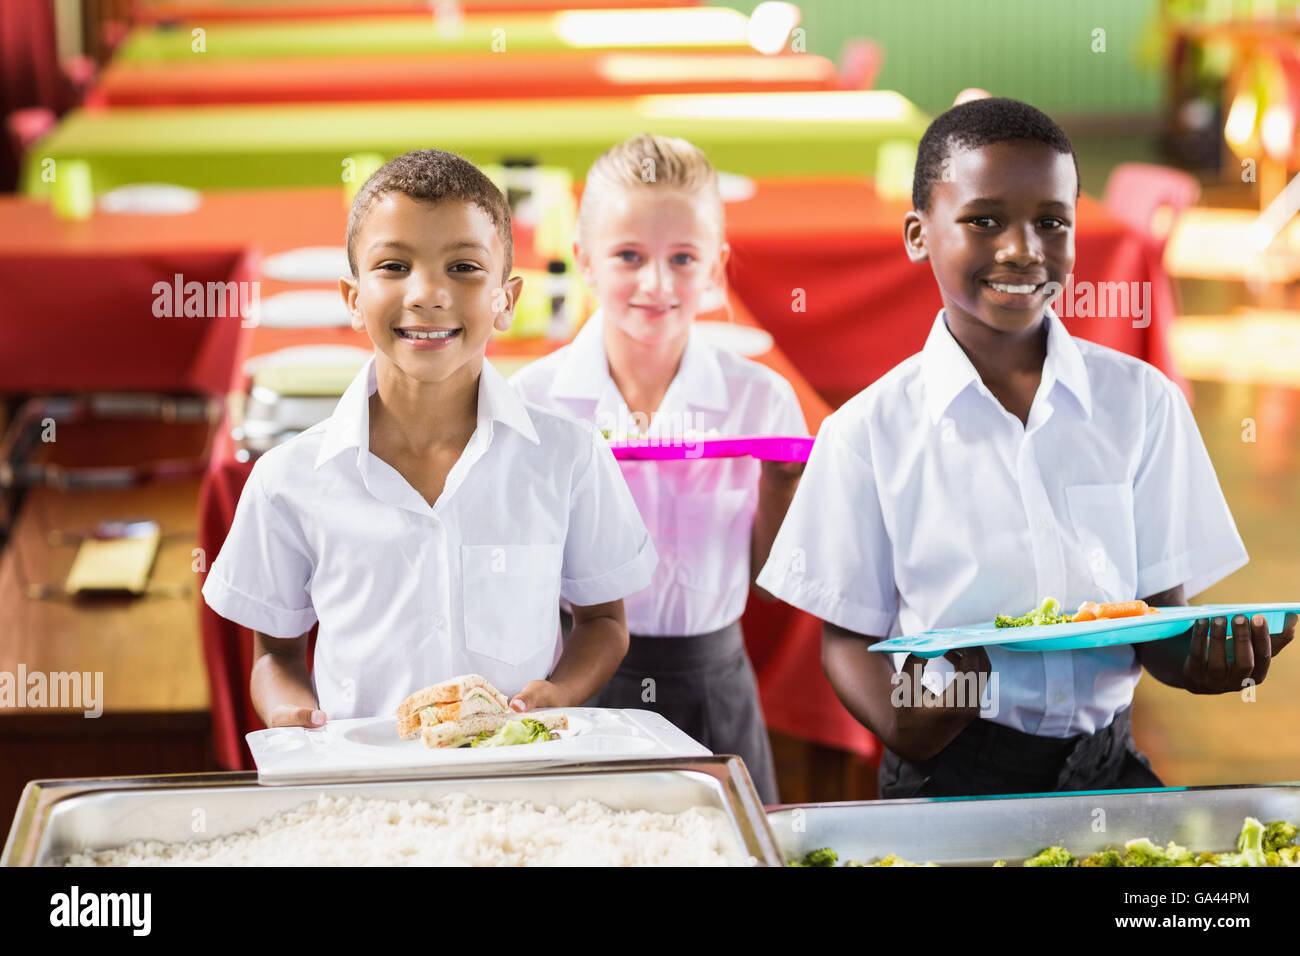 Smiling Children Holding Food Tray In Canteen At School Stock Photo,  Picture and Royalty Free Image. Image 119274036.